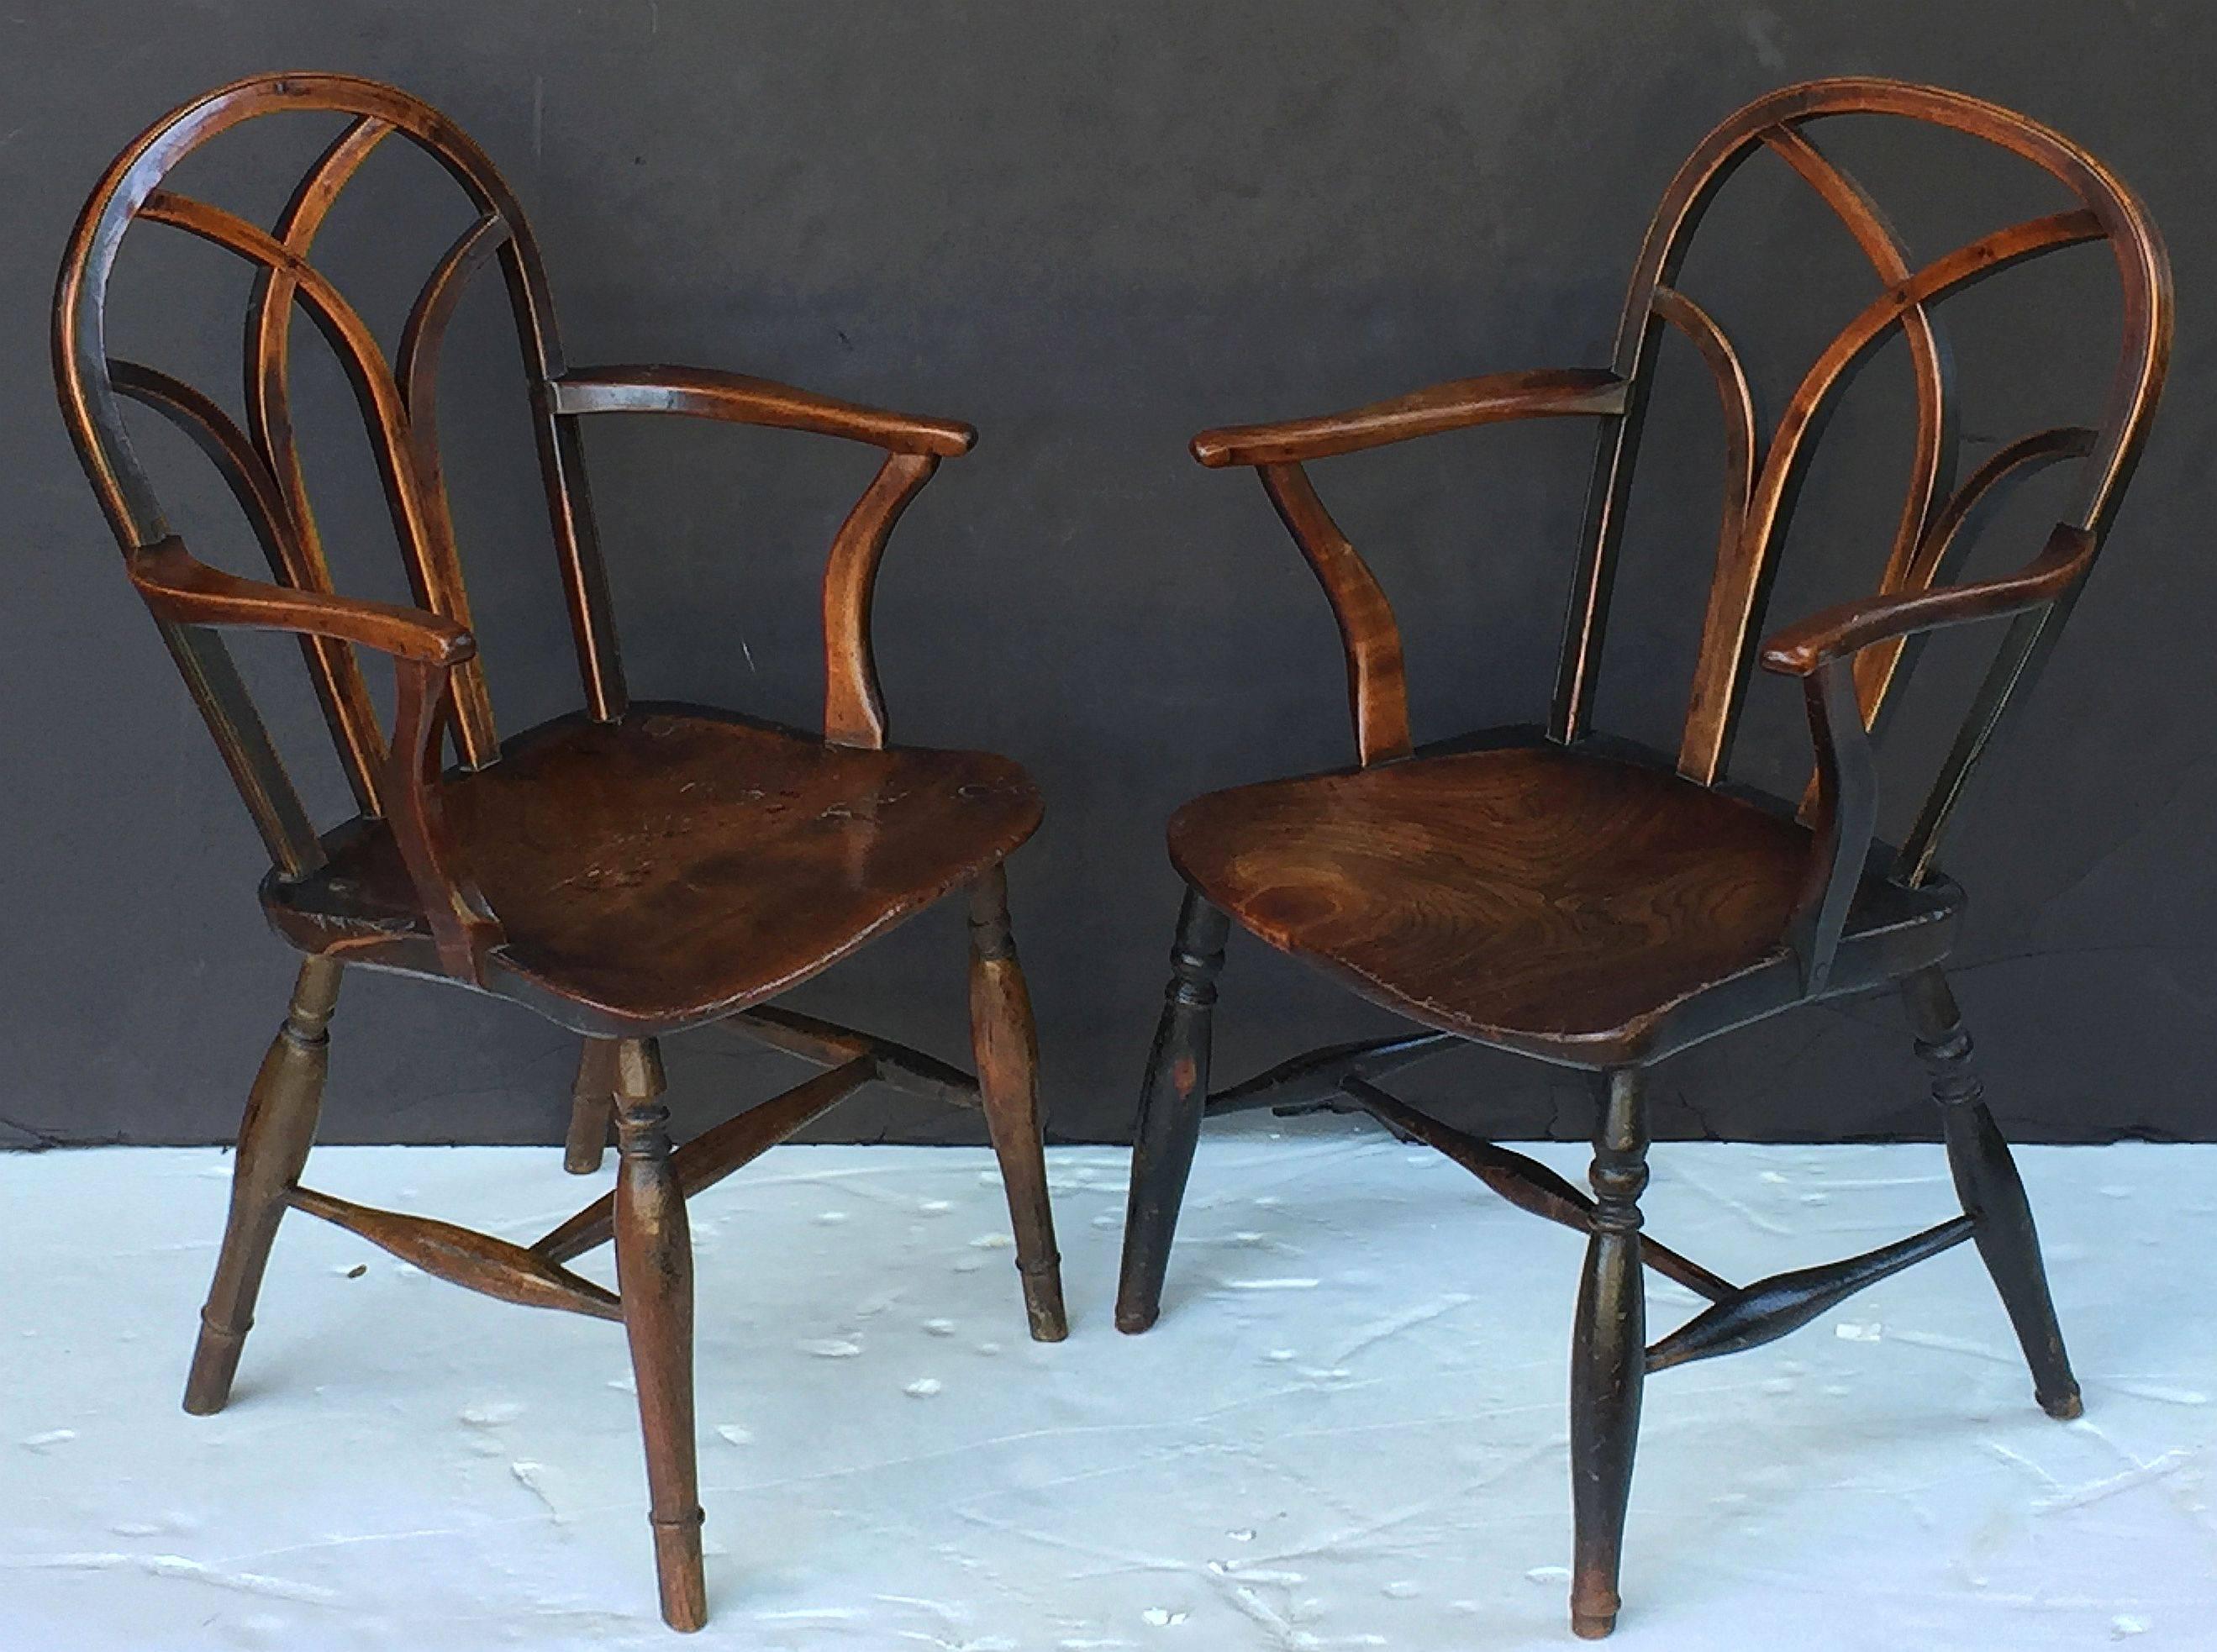 A finely patinated pair of English lowback Windsor armchairs of ash from the Georgian era, circa 1790, featuring interlaced bow backs with nicely turned arms, figured seats and handsomely turned legs. 

Individually priced - $3495 each.